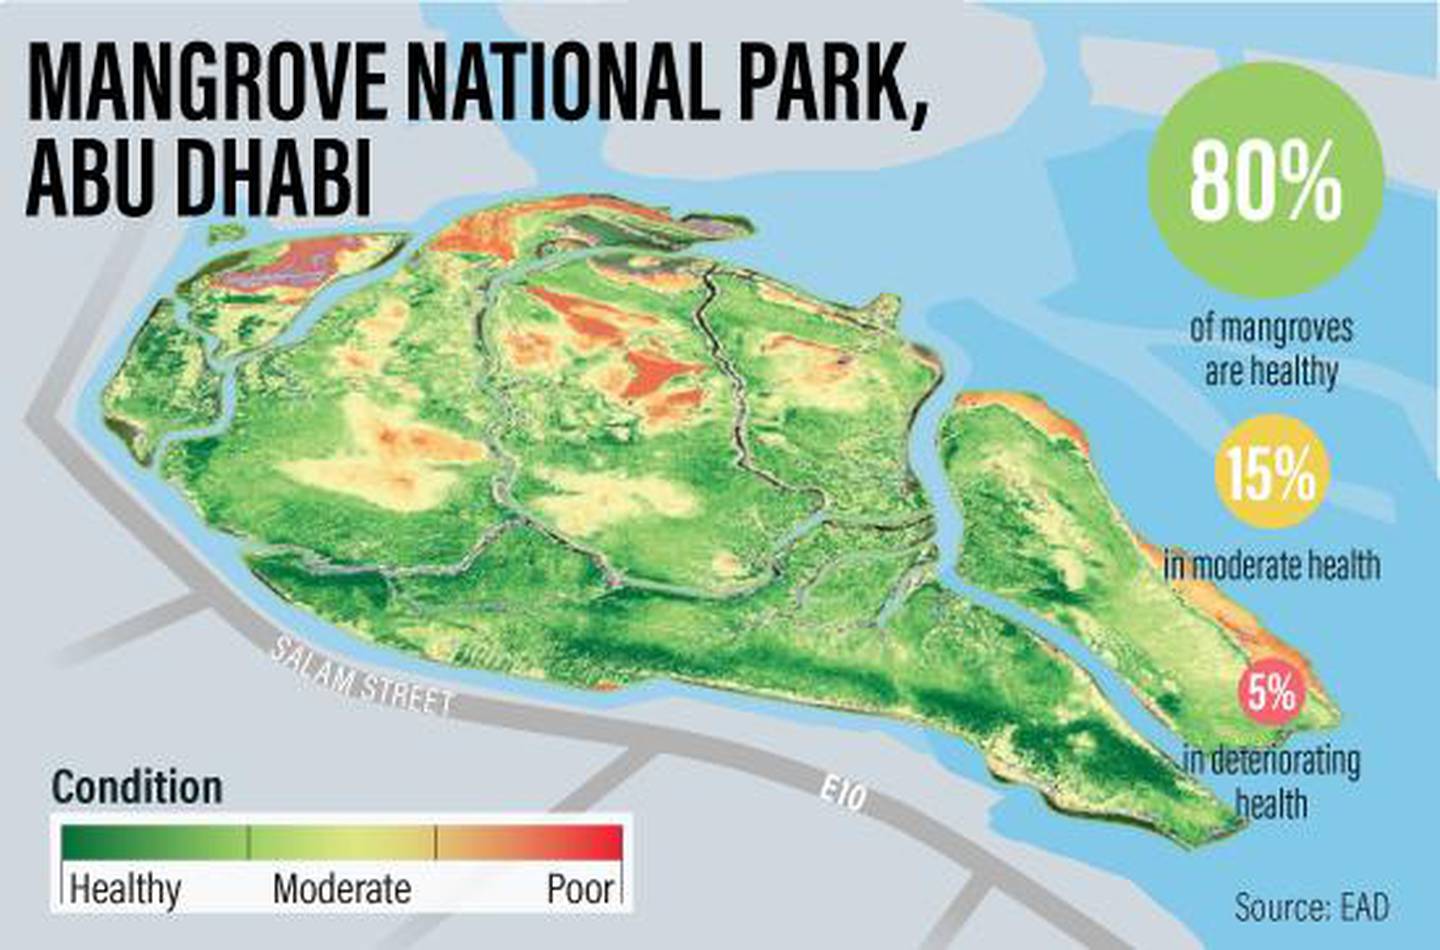 Satellite mapping released in 2018 found that 80 per cent of Abu Dhabi's mangroves are healthy, while 15 per cent are in moderate condition and 5 per cent are in deteriorating health. Ramon Peñas / The National